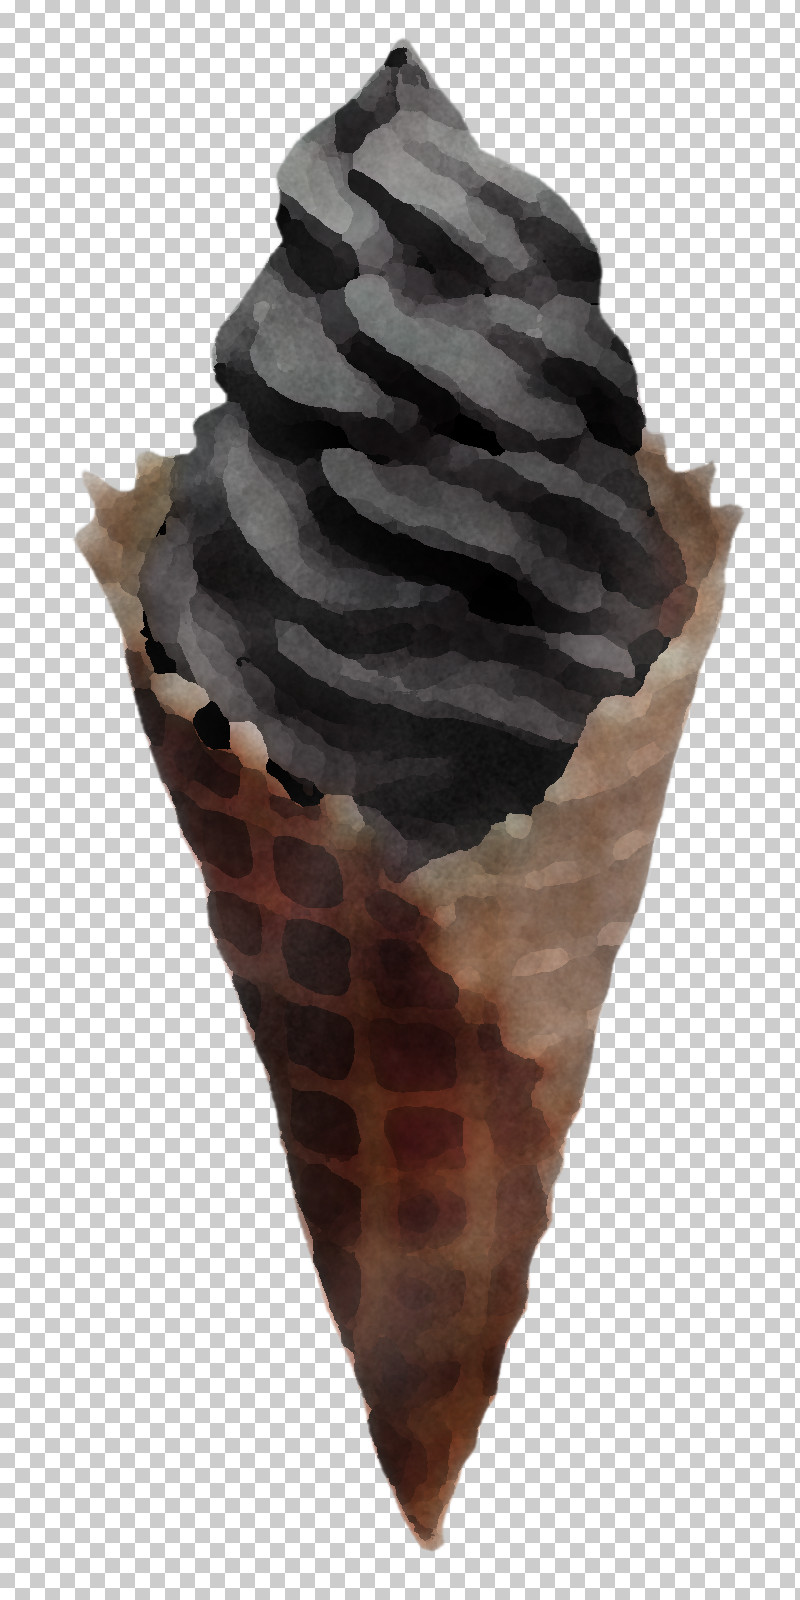 Ice Cream PNG, Clipart, Chocolate Ice Cream, Cone, Dairy, Dessert, Food Free PNG Download